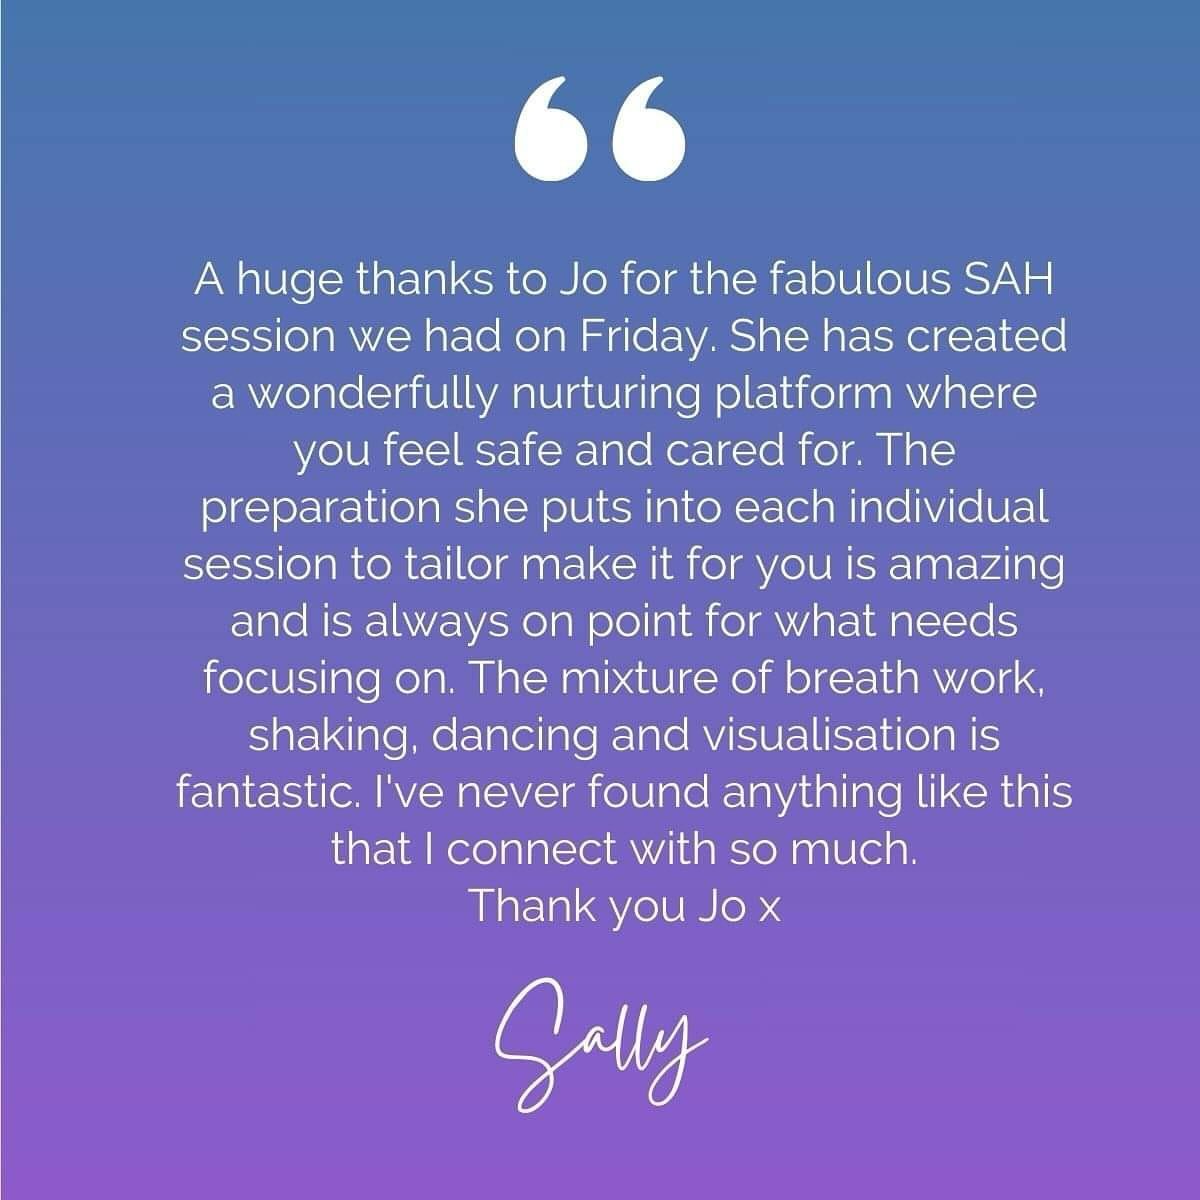 🌟 Sharing some heartfelt words from the lovely Sally about her recent SAH session with me.🌟 

&ldquo;A huge thanks to Jo for the fabulous SAH session we had on Friday. She has created a wonderfully nurturing platform where you feel safe and cared f